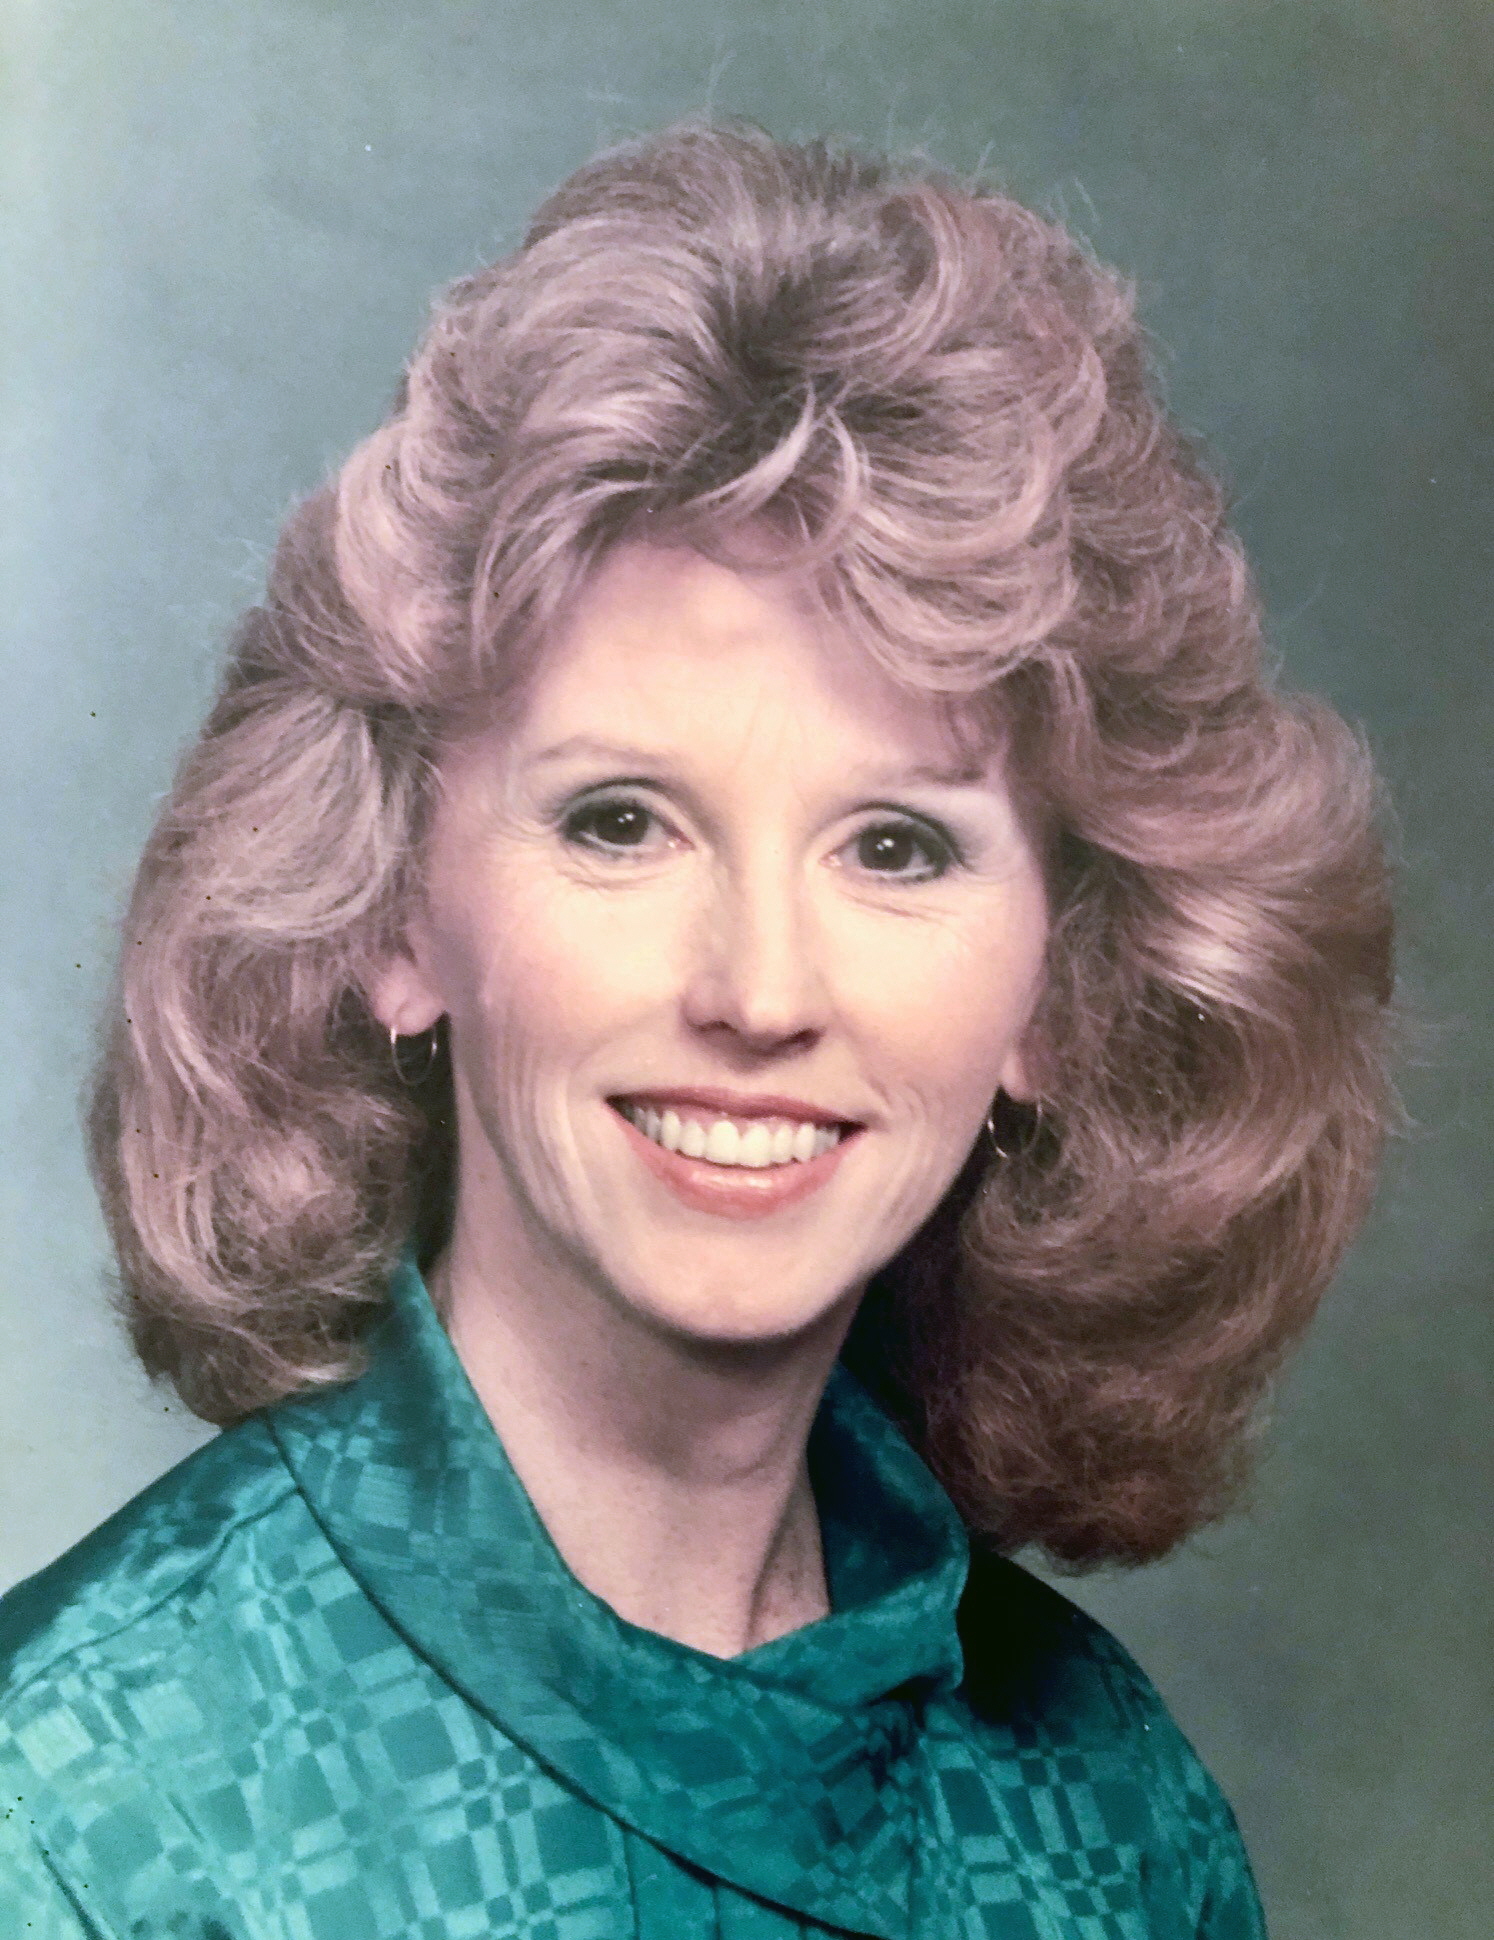 Obituary information for Barbara Jean Taillefer